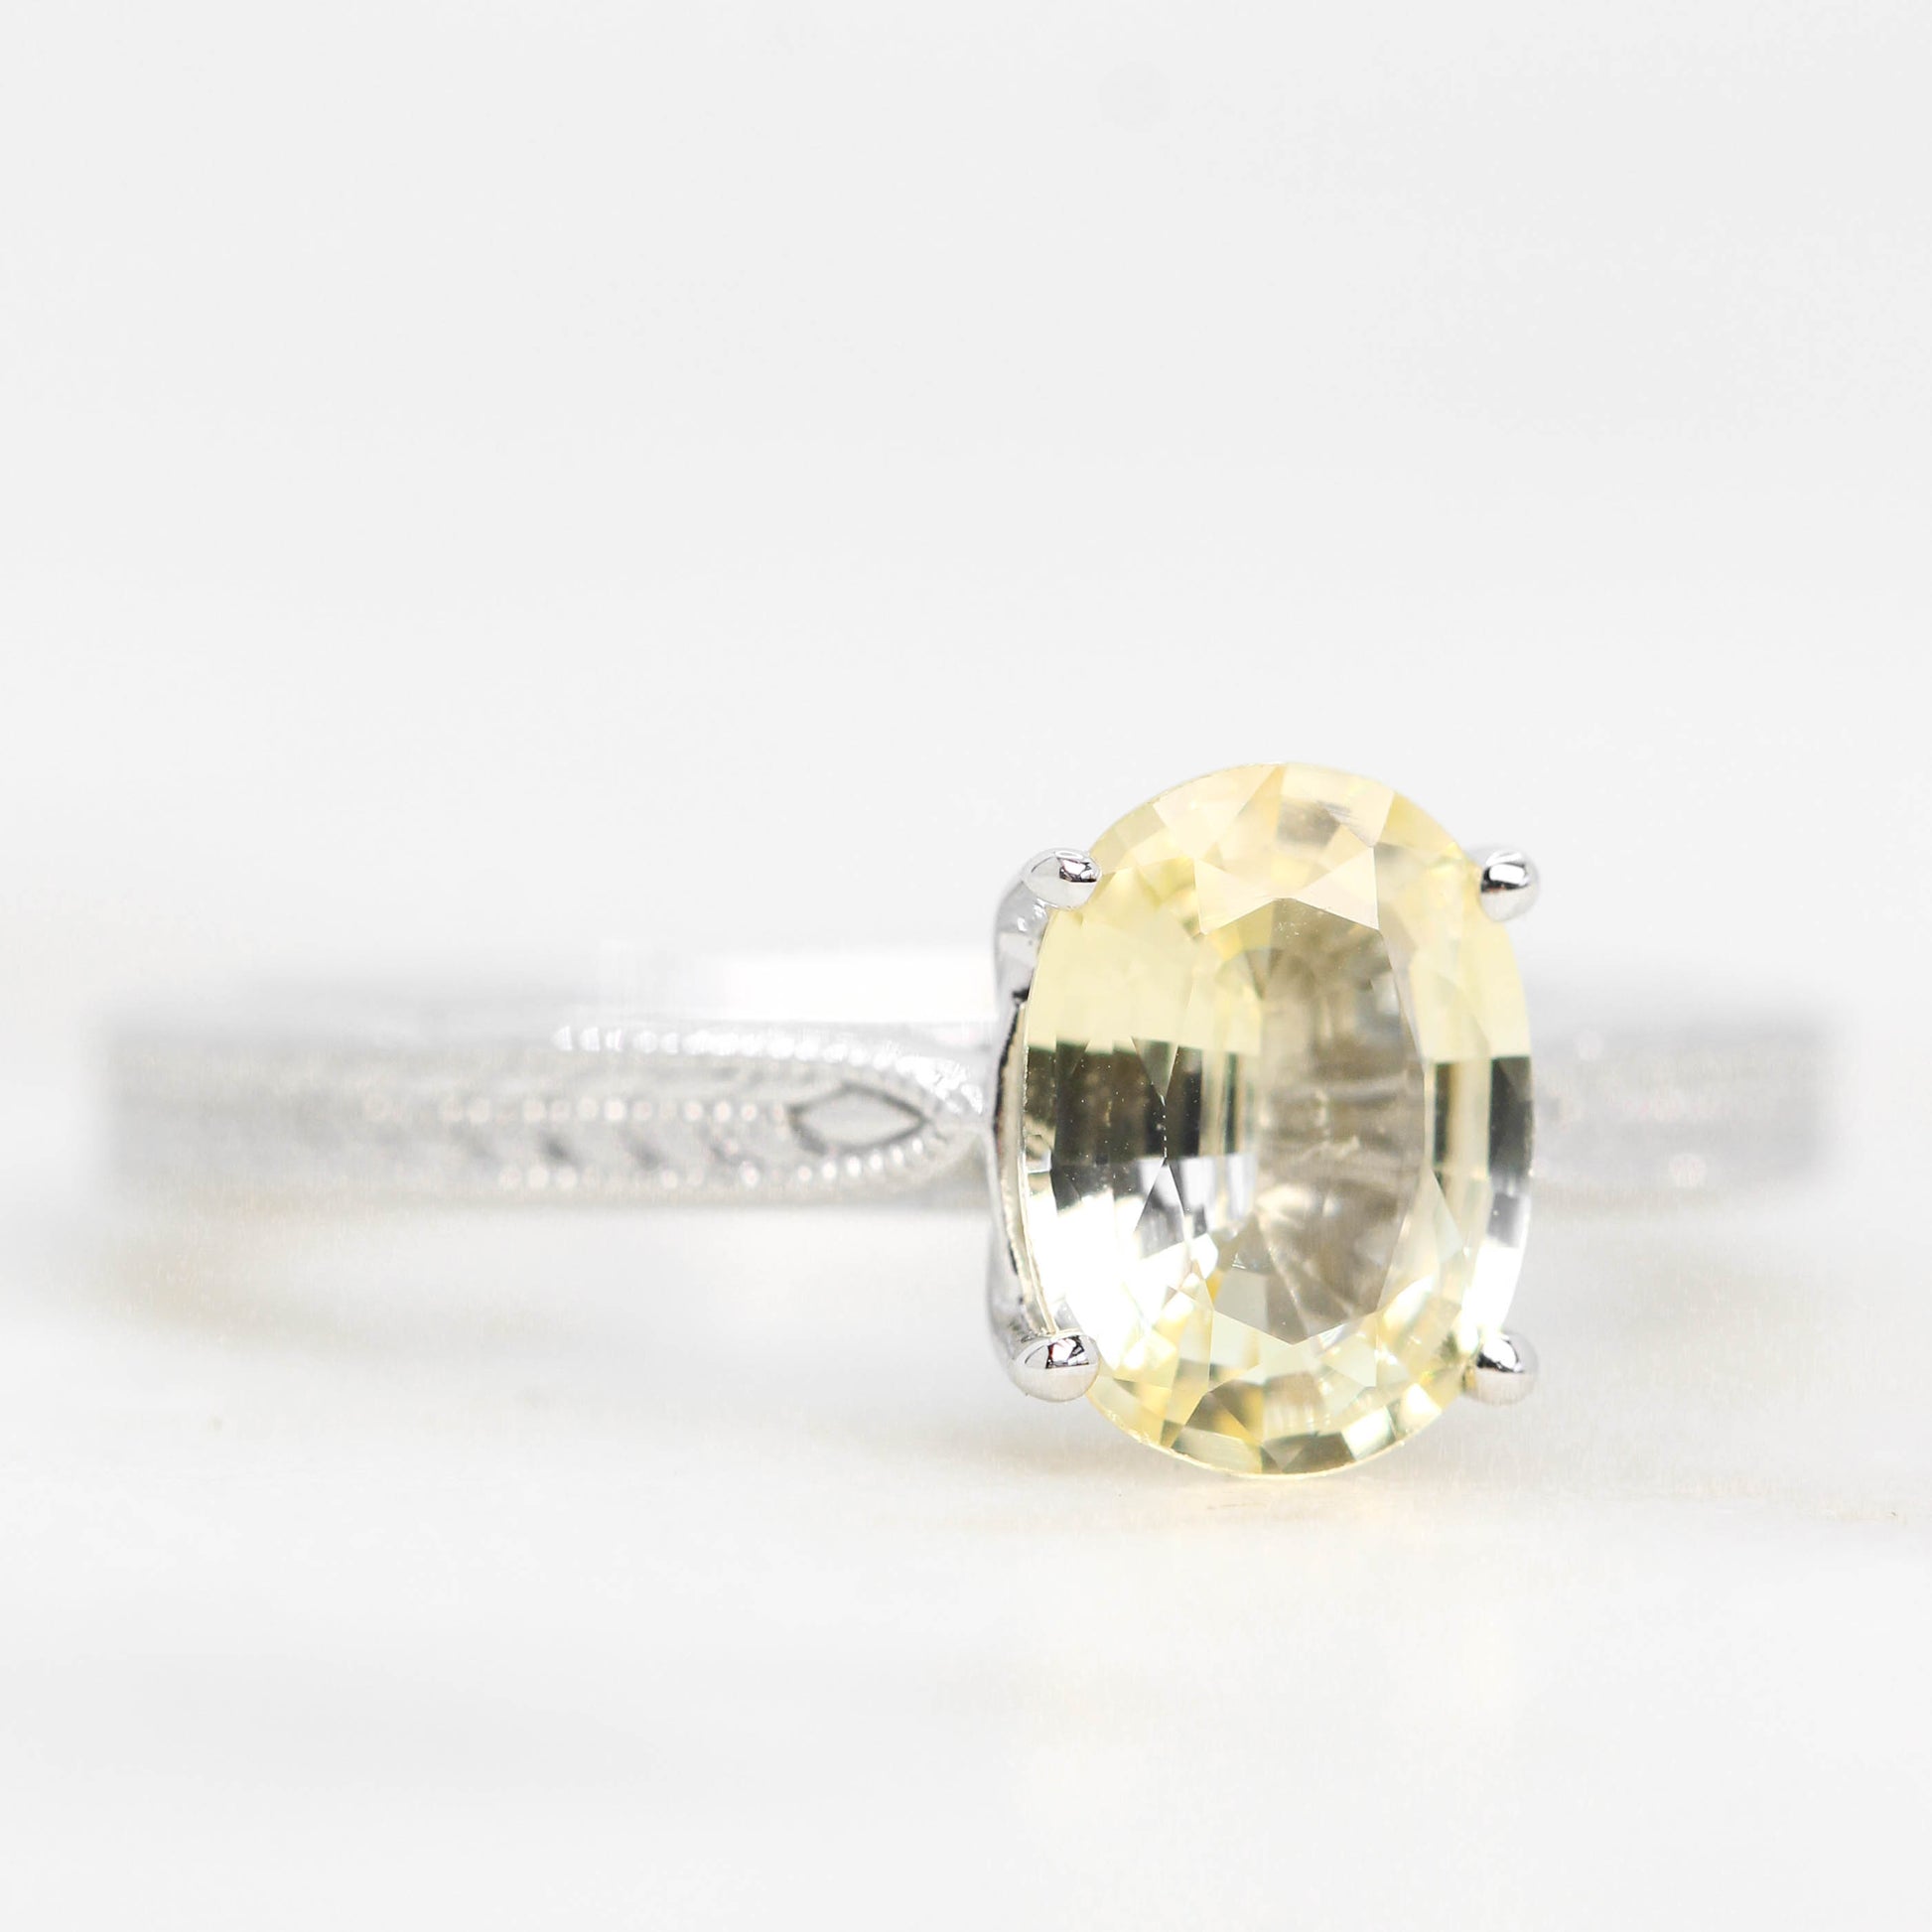 Edith Ring with a 1.28 Carat Yellow Oval Sapphire in 14k White Gold - Ready to Size and Ship - Midwinter Co. Alternative Bridal Rings and Modern Fine Jewelry